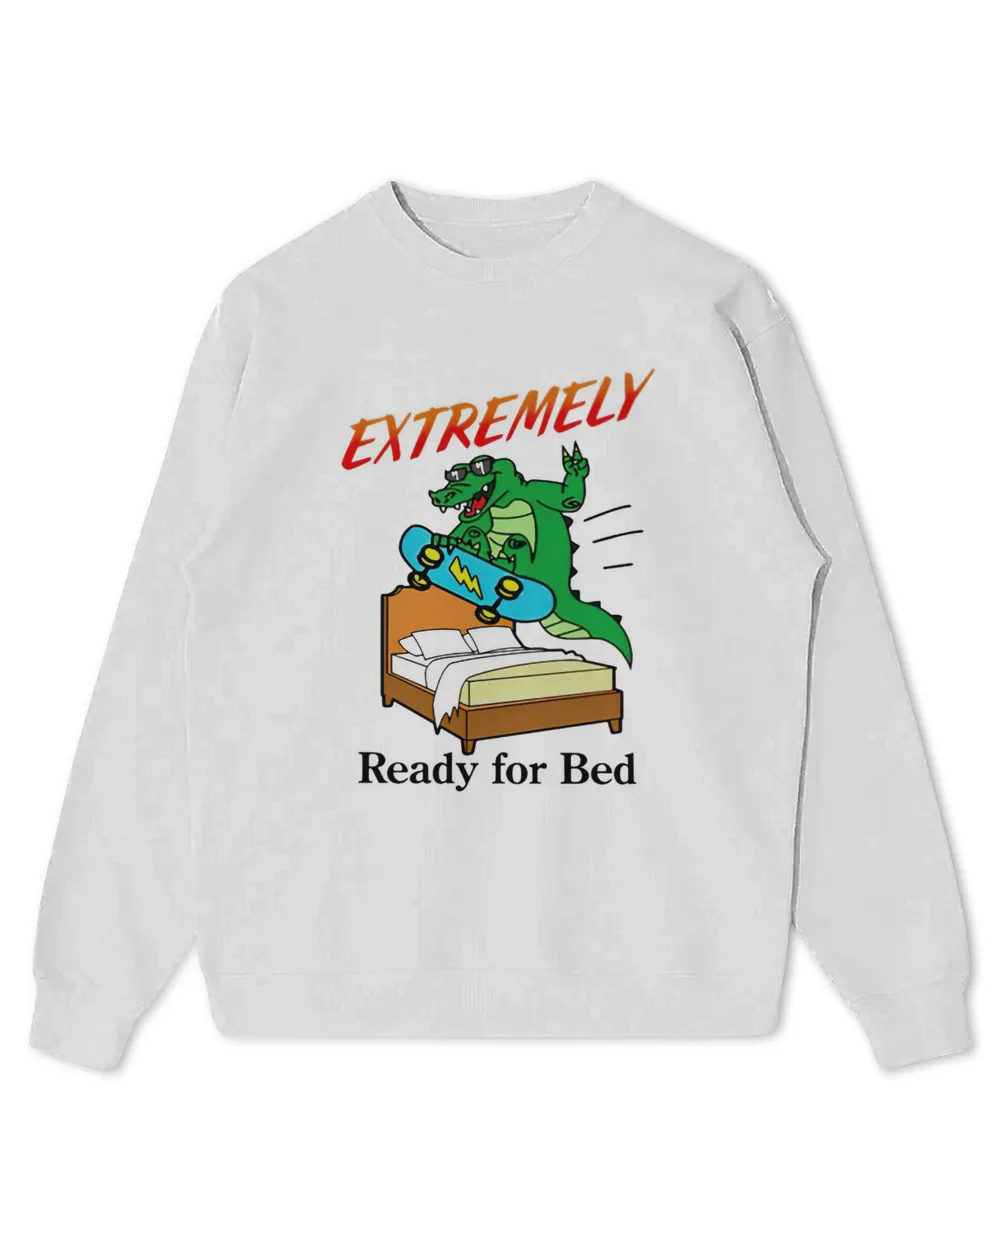 Gator extremely ready for bed shirt